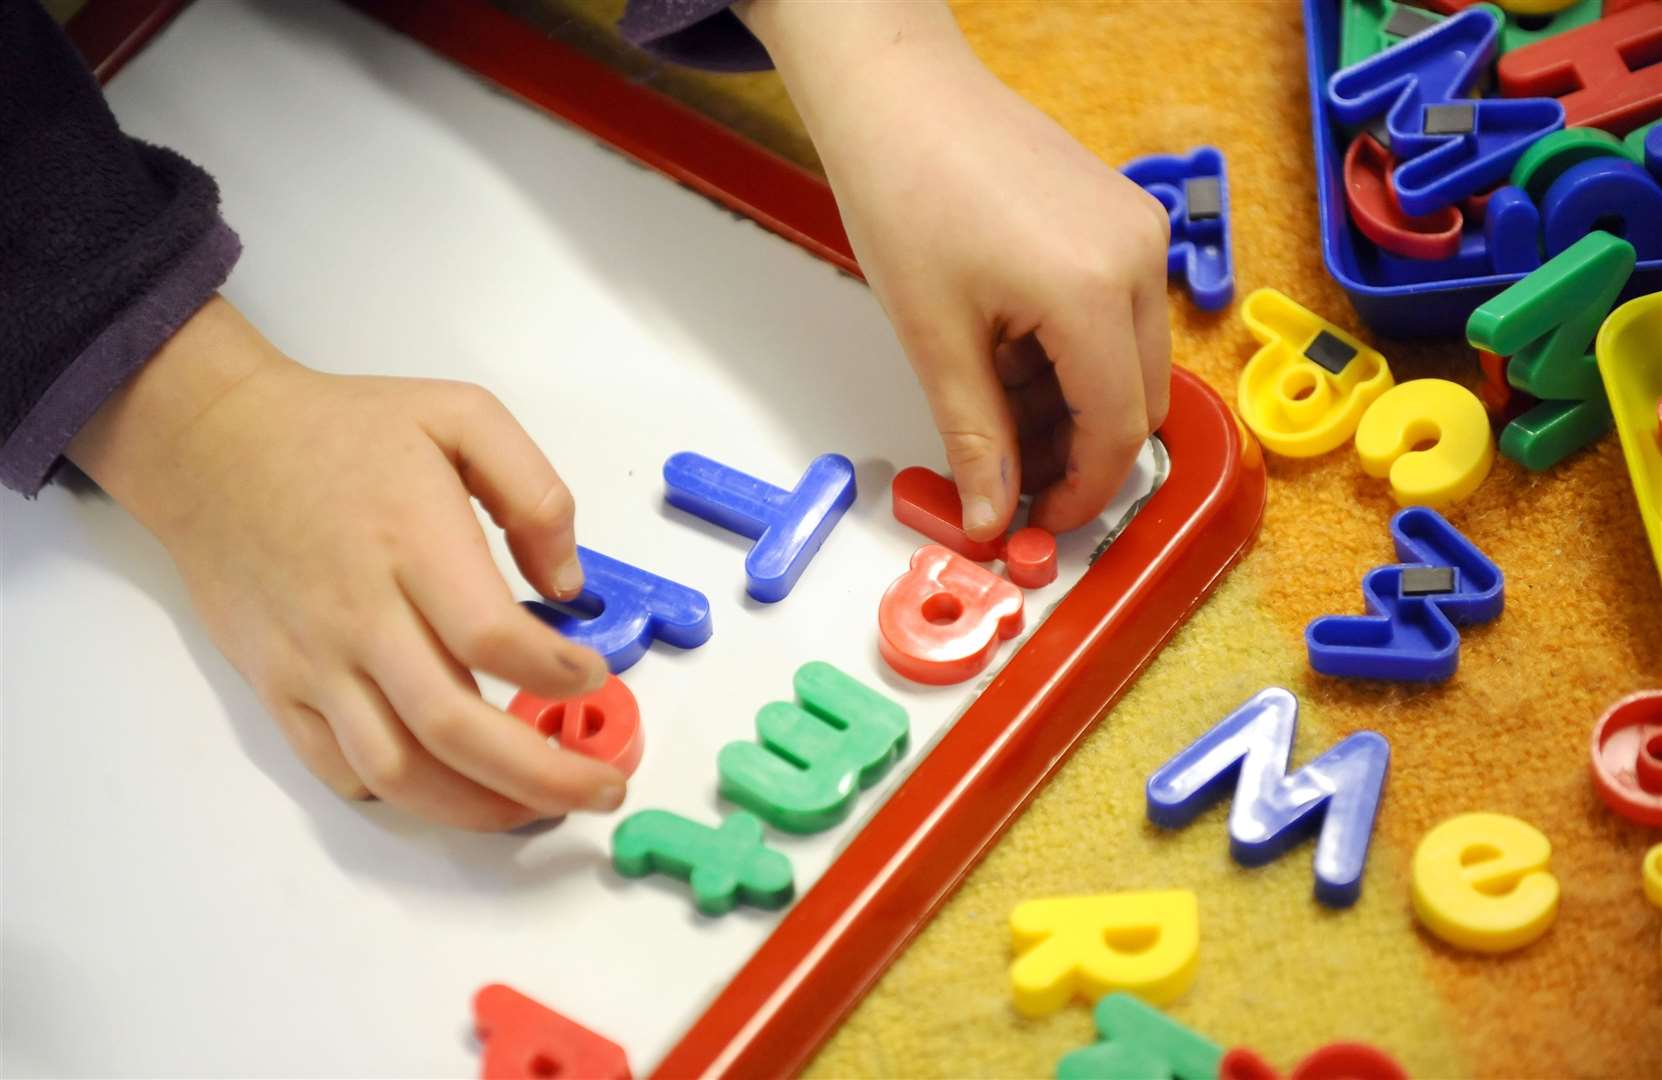 Hundreds of families are not taking advantage of free childcare schemes, according to an audit report